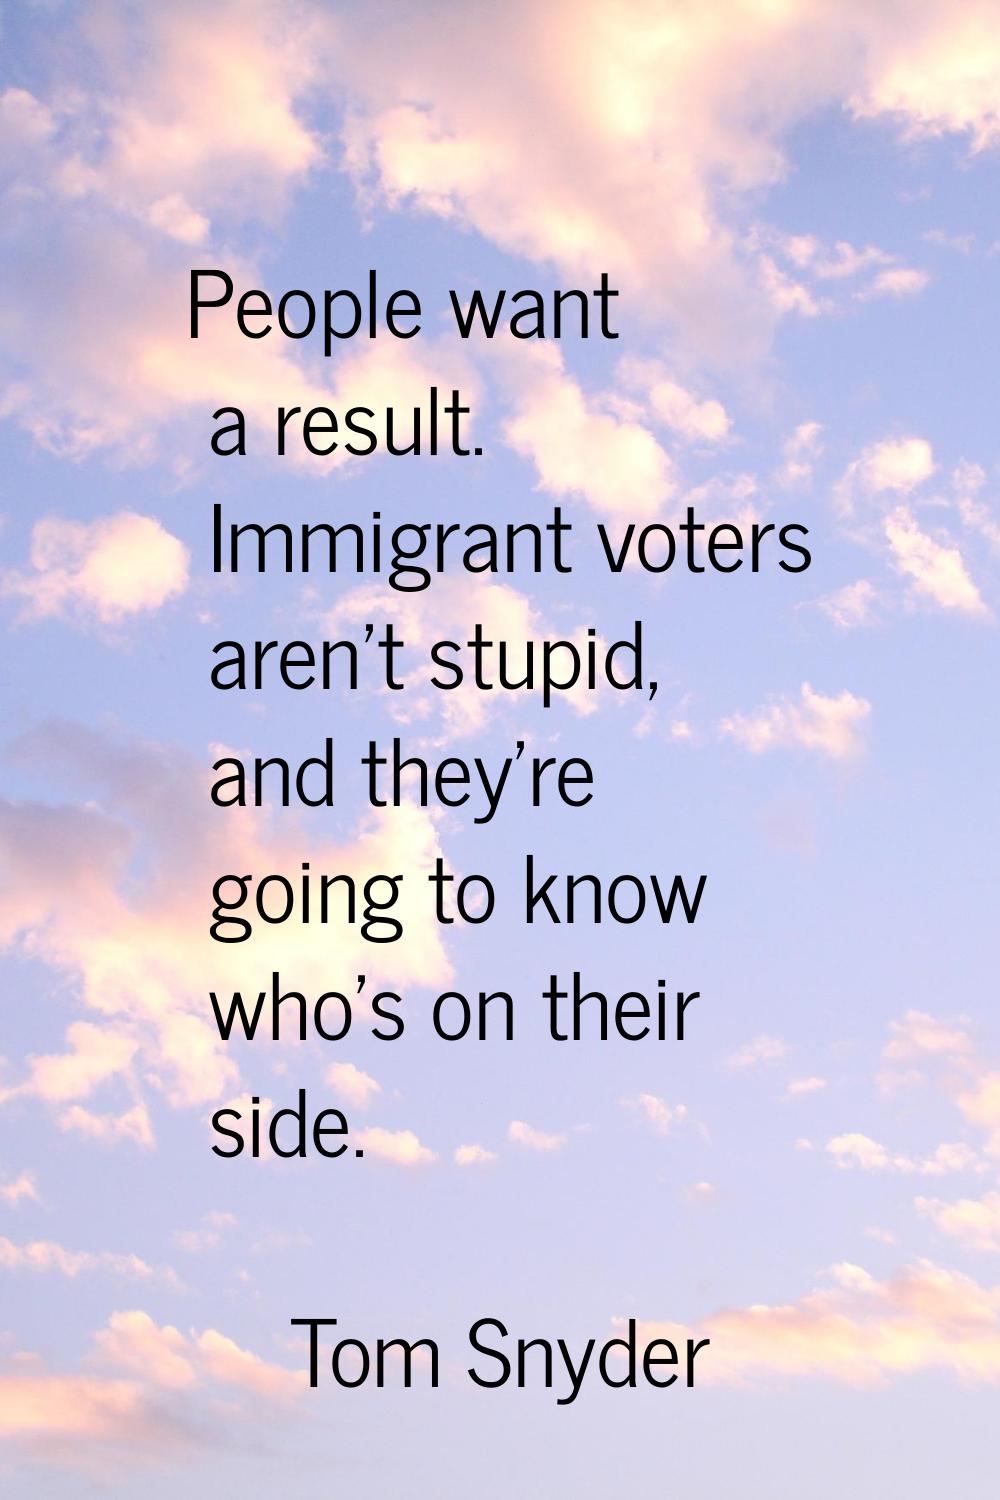 People want a result. Immigrant voters aren't stupid, and they're going to know who's on their side